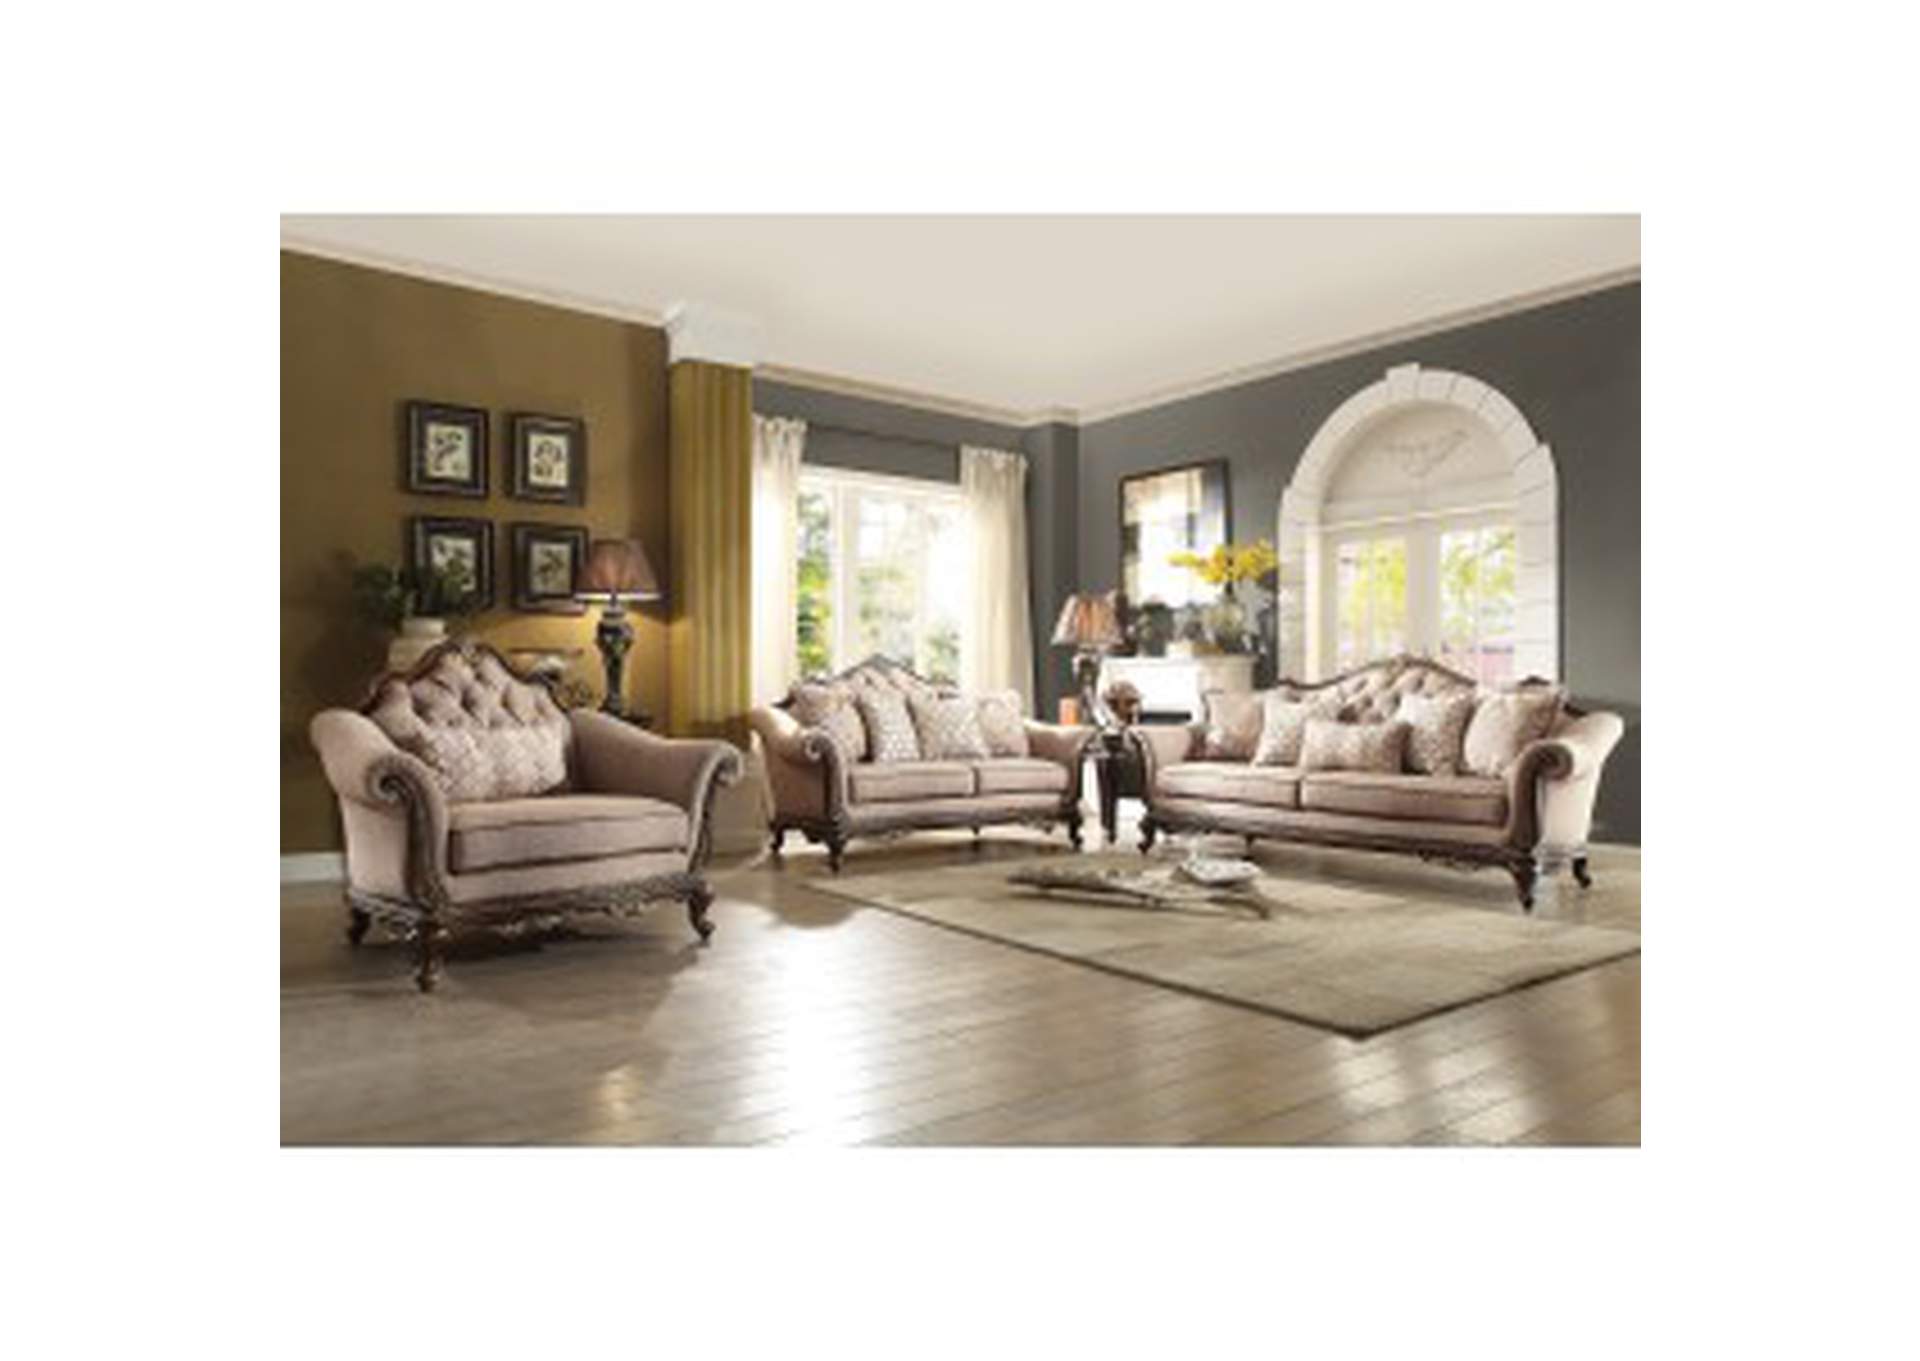 Bonaventure Park Sofa With 4 Square And 1 Kidney Pillows,Homelegance